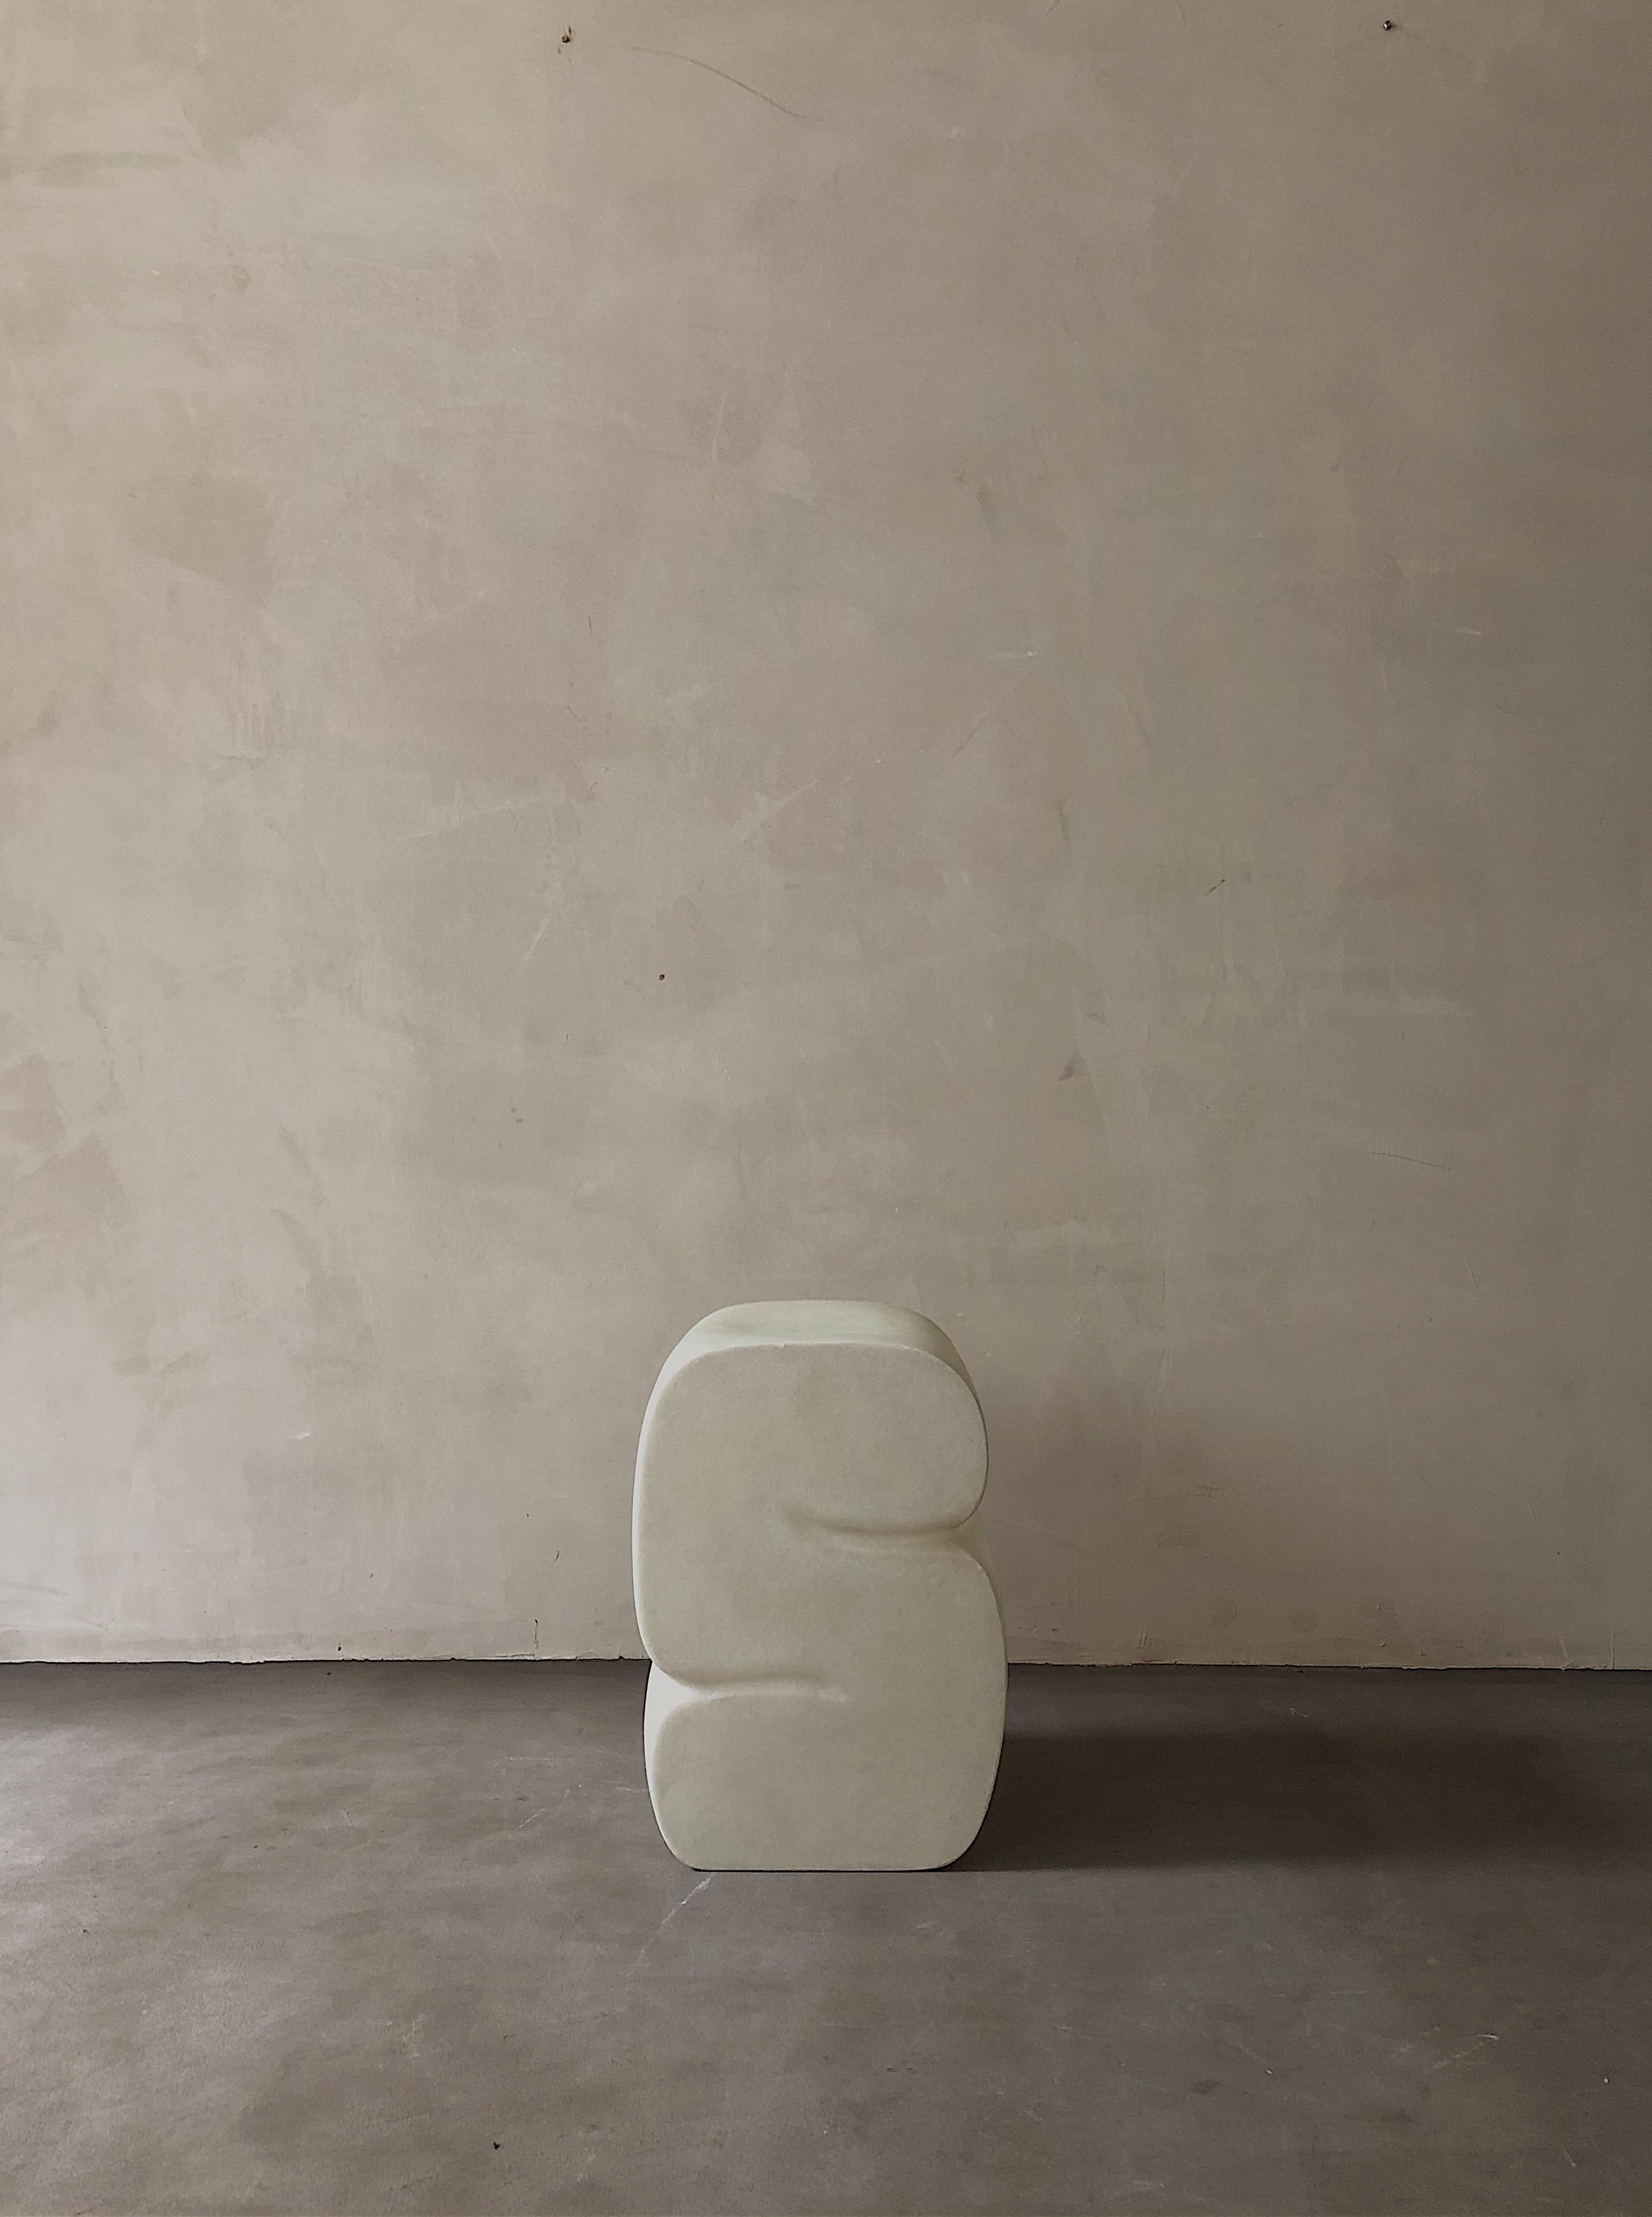 White stool by Karstudio.
Materials: FRP.
Dimensions: 32 x 32 x 45 cm.

It shapes in a curl-up position, casual meanwhile restrained. The side designed as a cross-section of the furniture to present the curve and texture.

Kar- is the root of